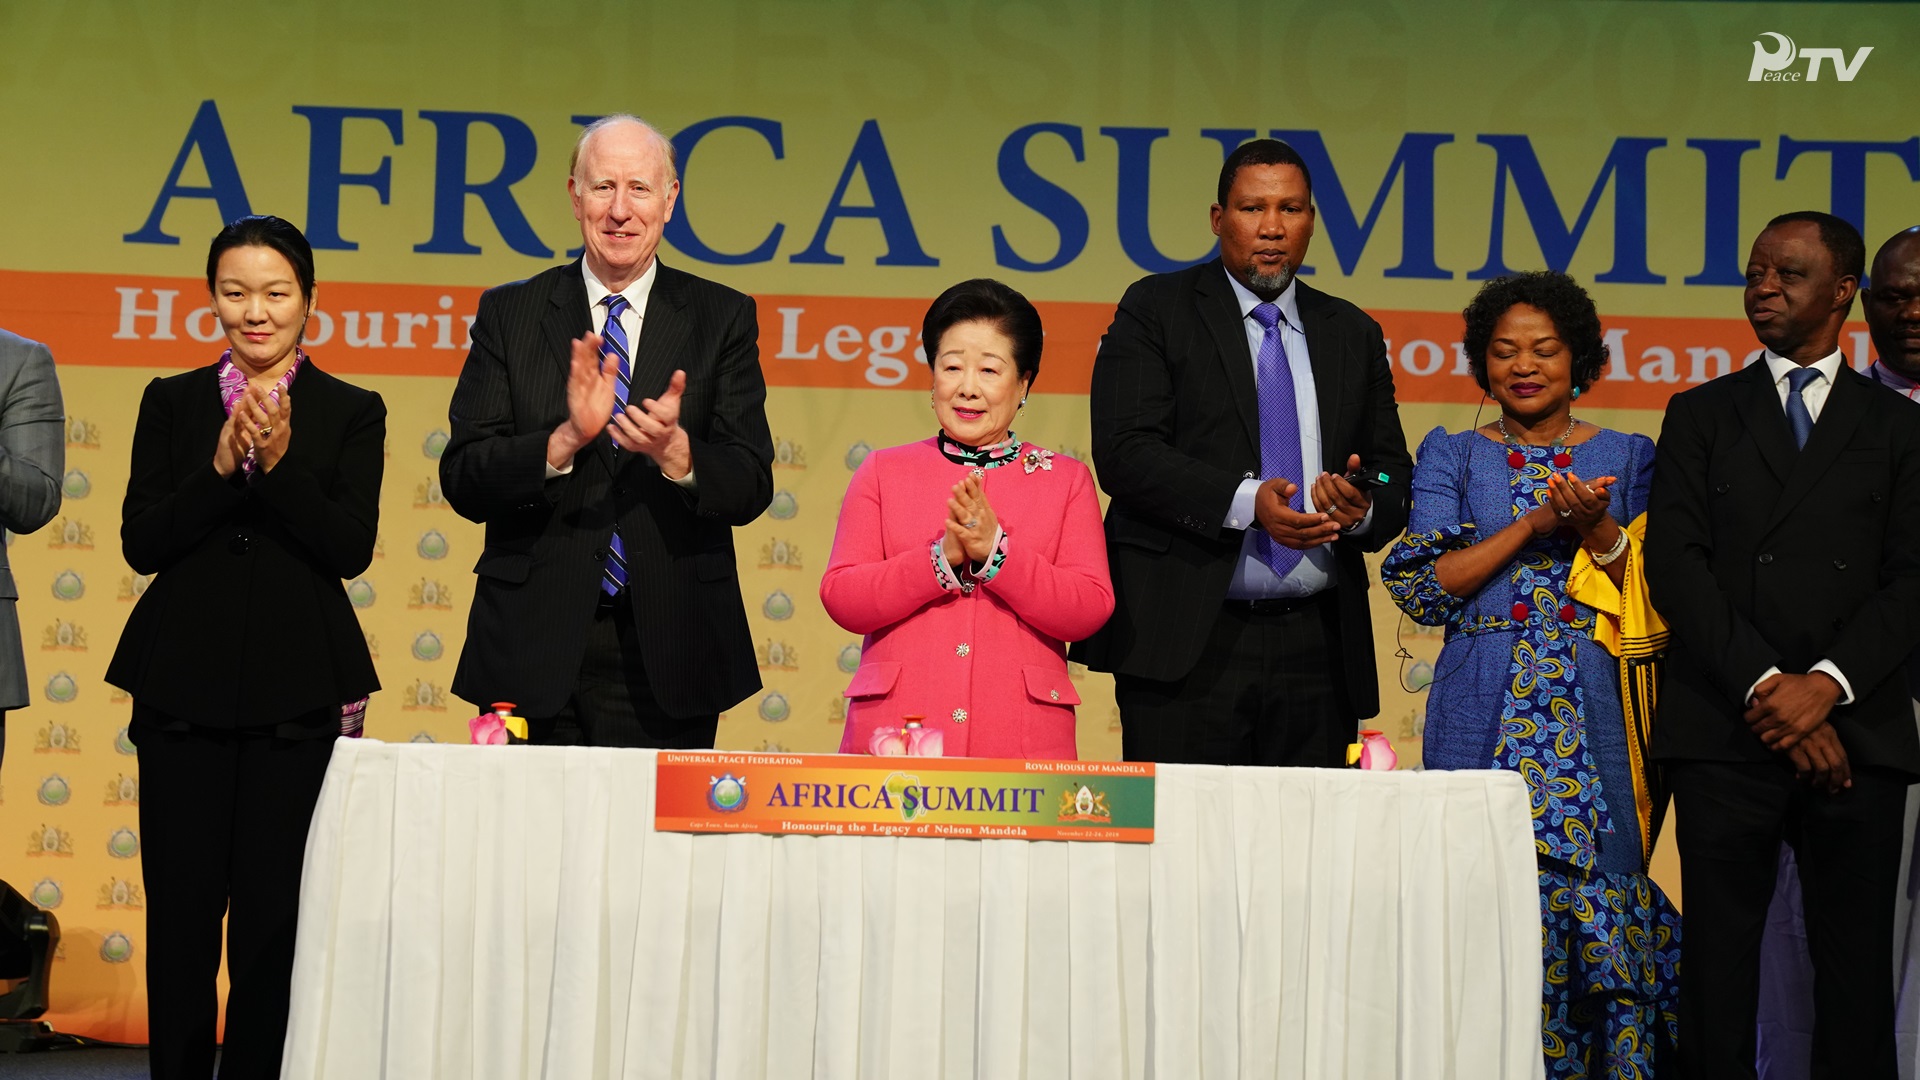 2018 Africa Summit Opening Ceremony (November 22) Cape Town International Convention Center